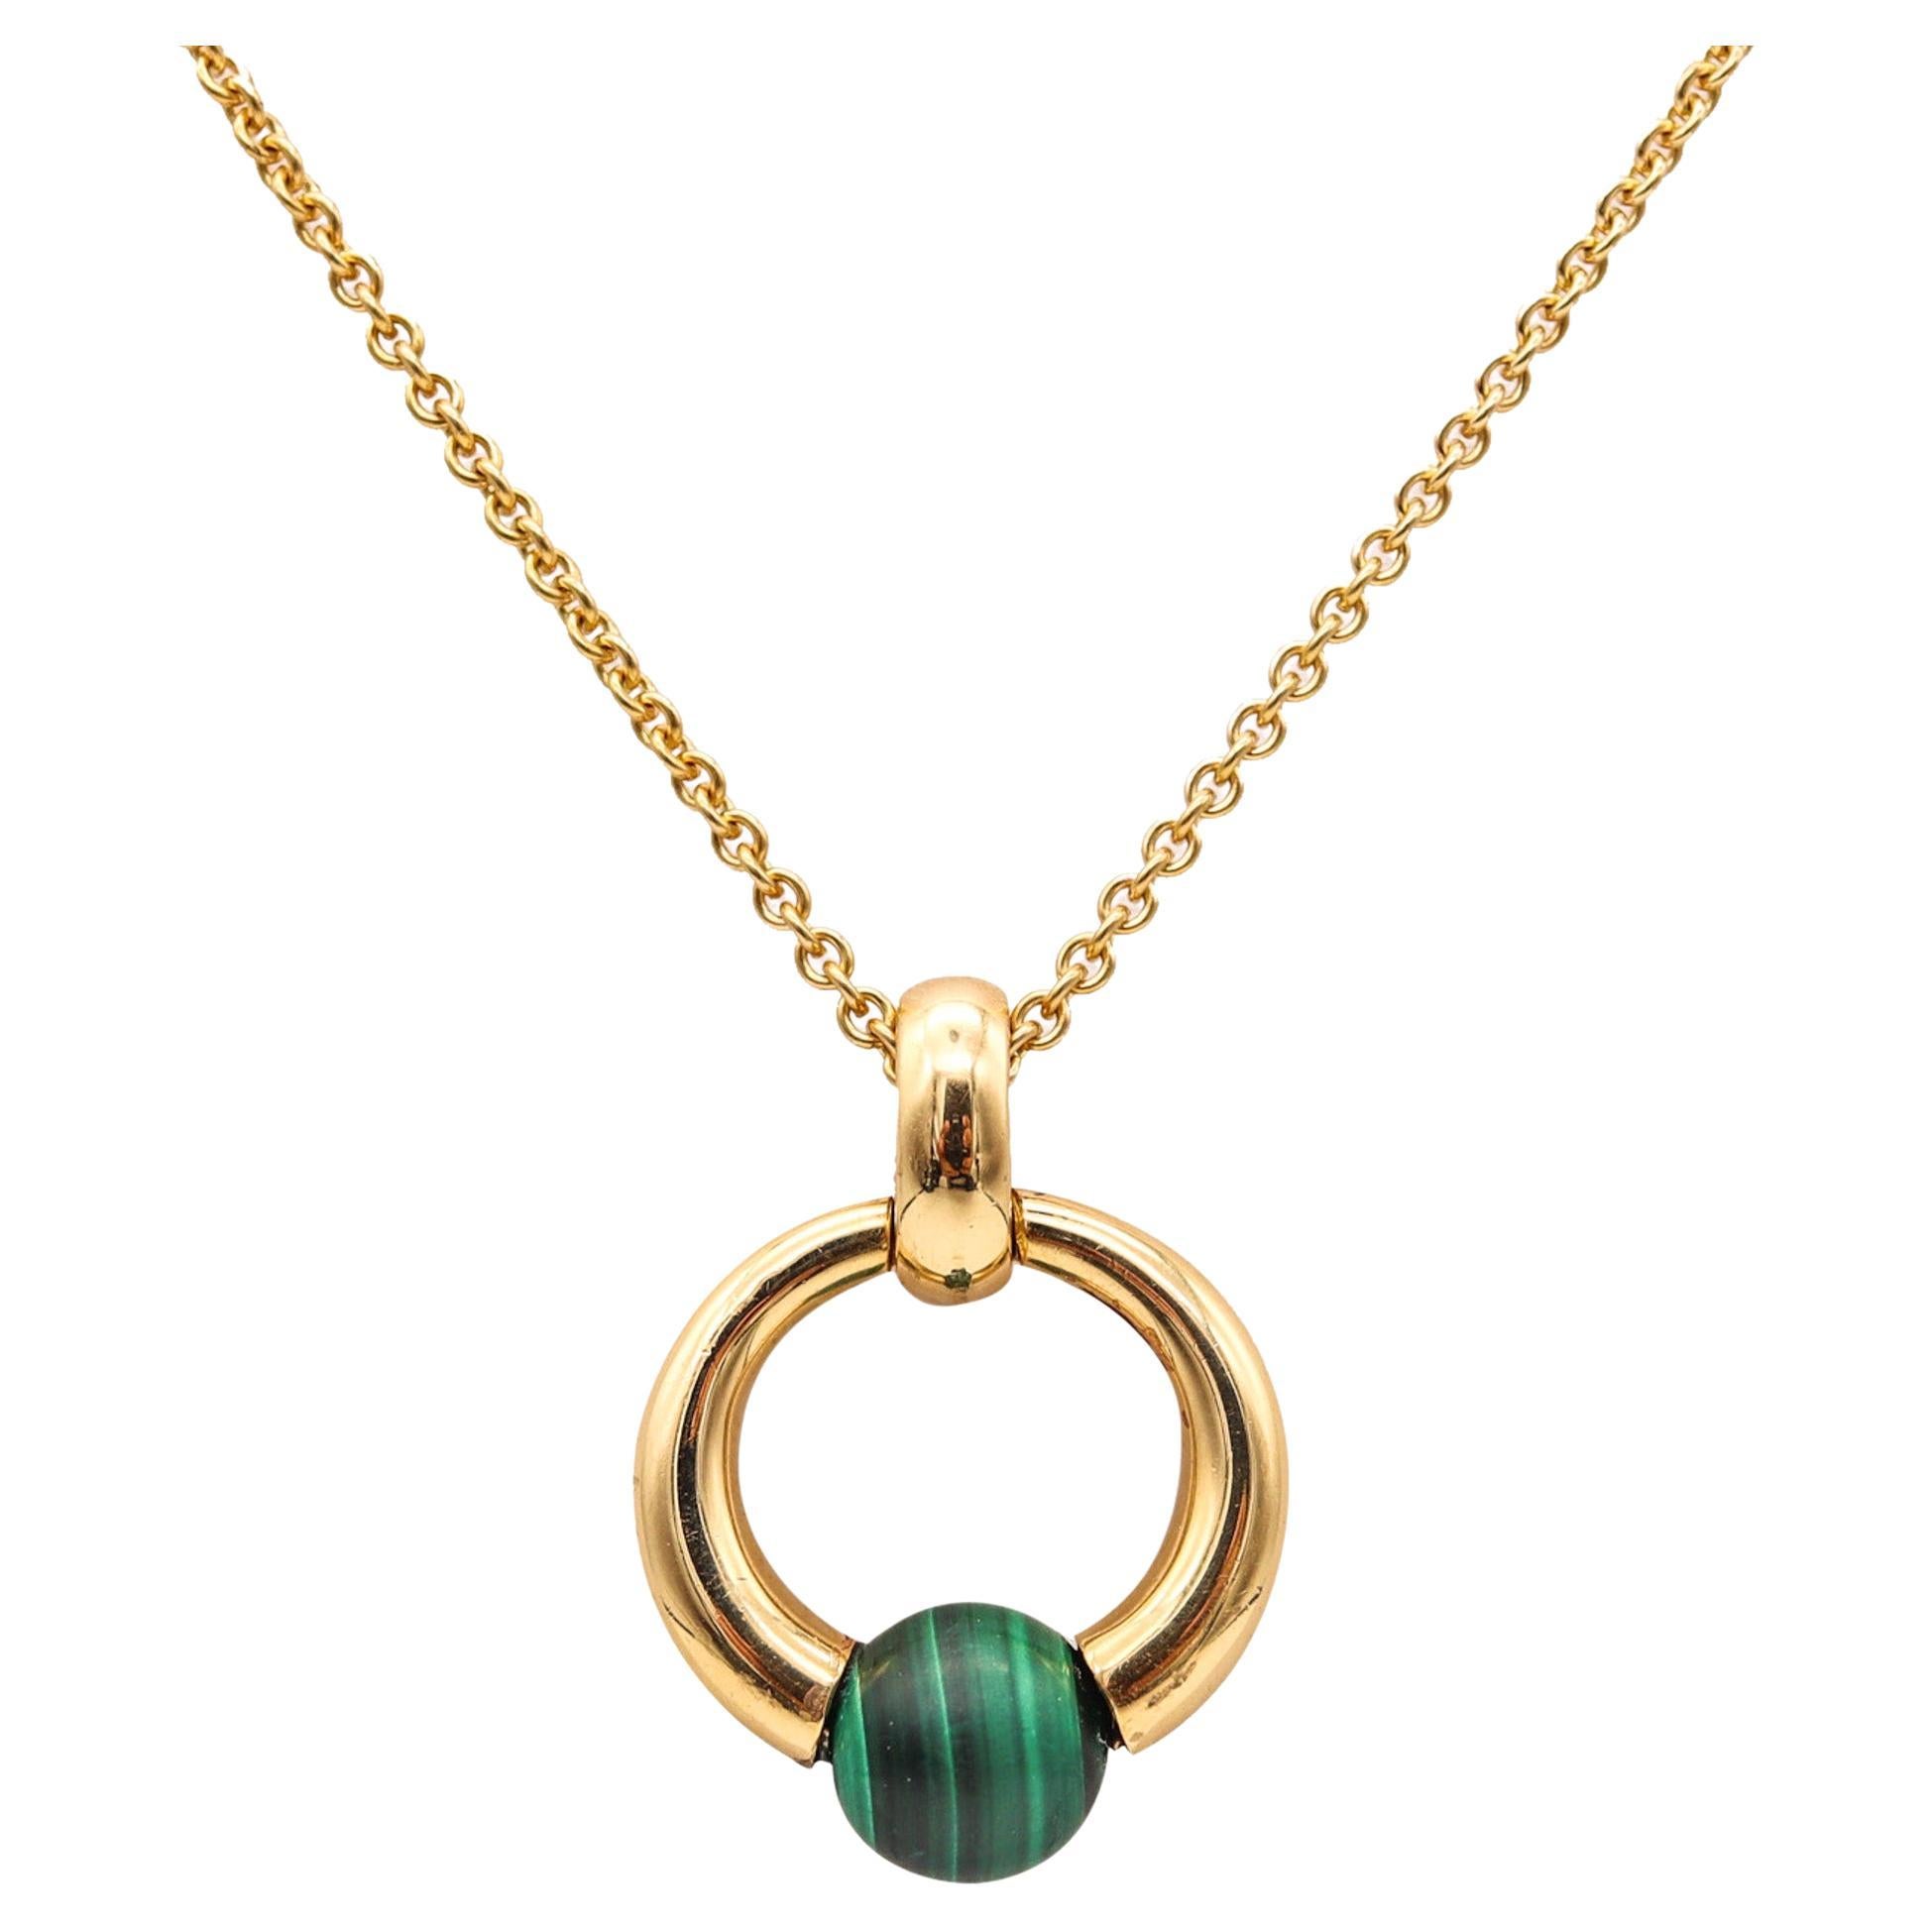 Cartier Paris 1994 Rare Necklace Pendant In 18Kt Yellow Gold With Malachite For Sale